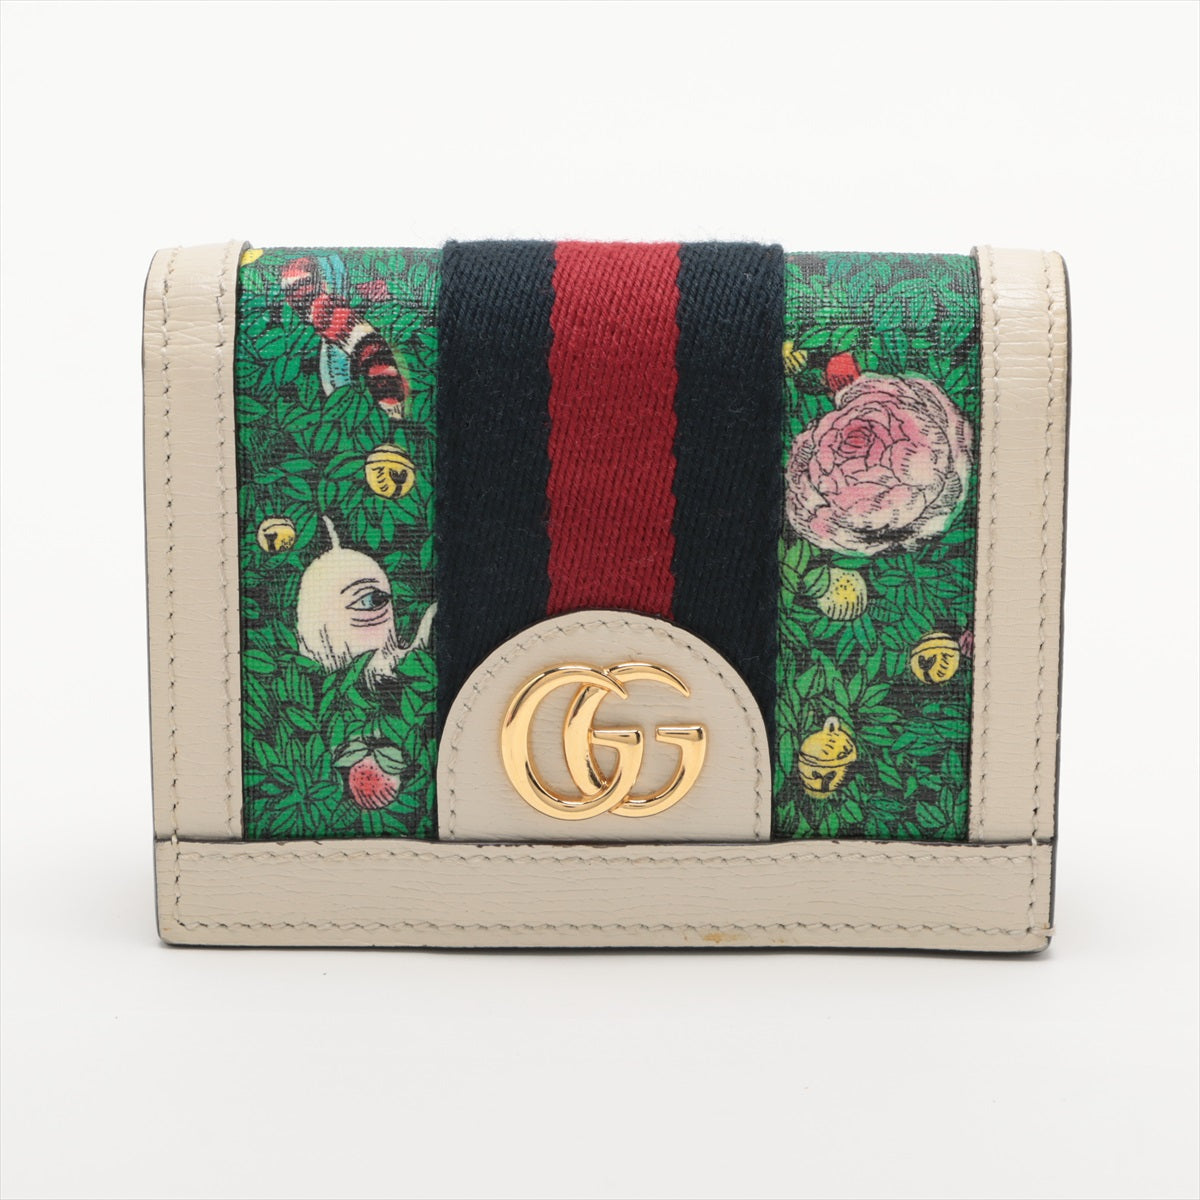 Gucci GG Marmont 523155 PVC & leather Wallet White